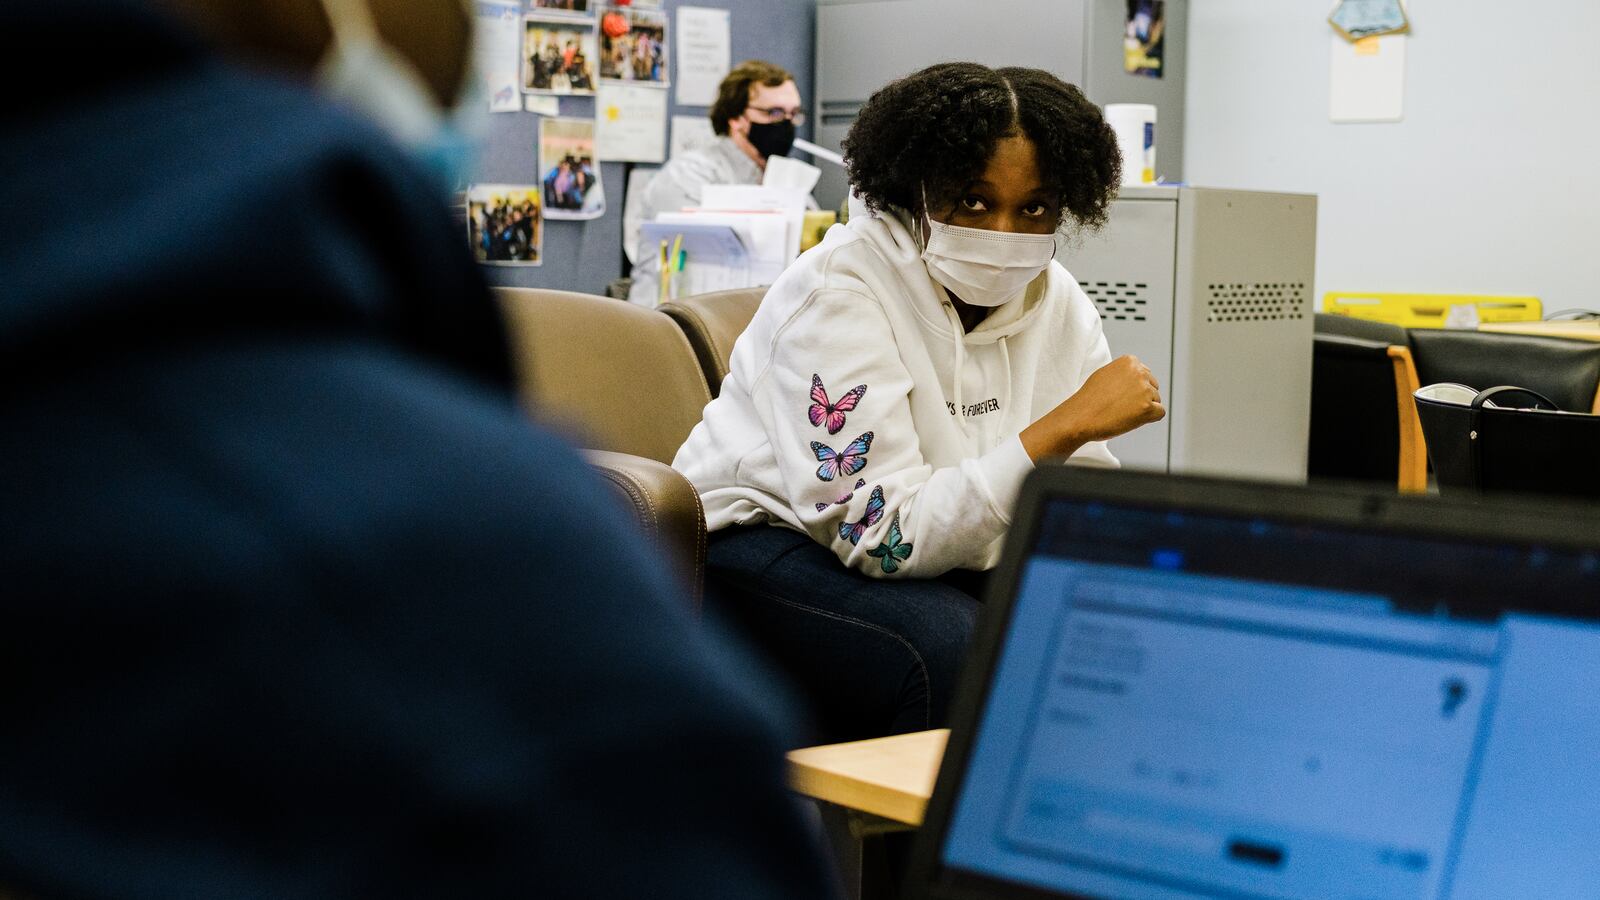 A young woman wearing a protective mask, white hoodie with blue and pink butterflies sits across from a young man wearing a blue hoodie working on a laptop. There is a male teacher sitting behind a desk in the background.